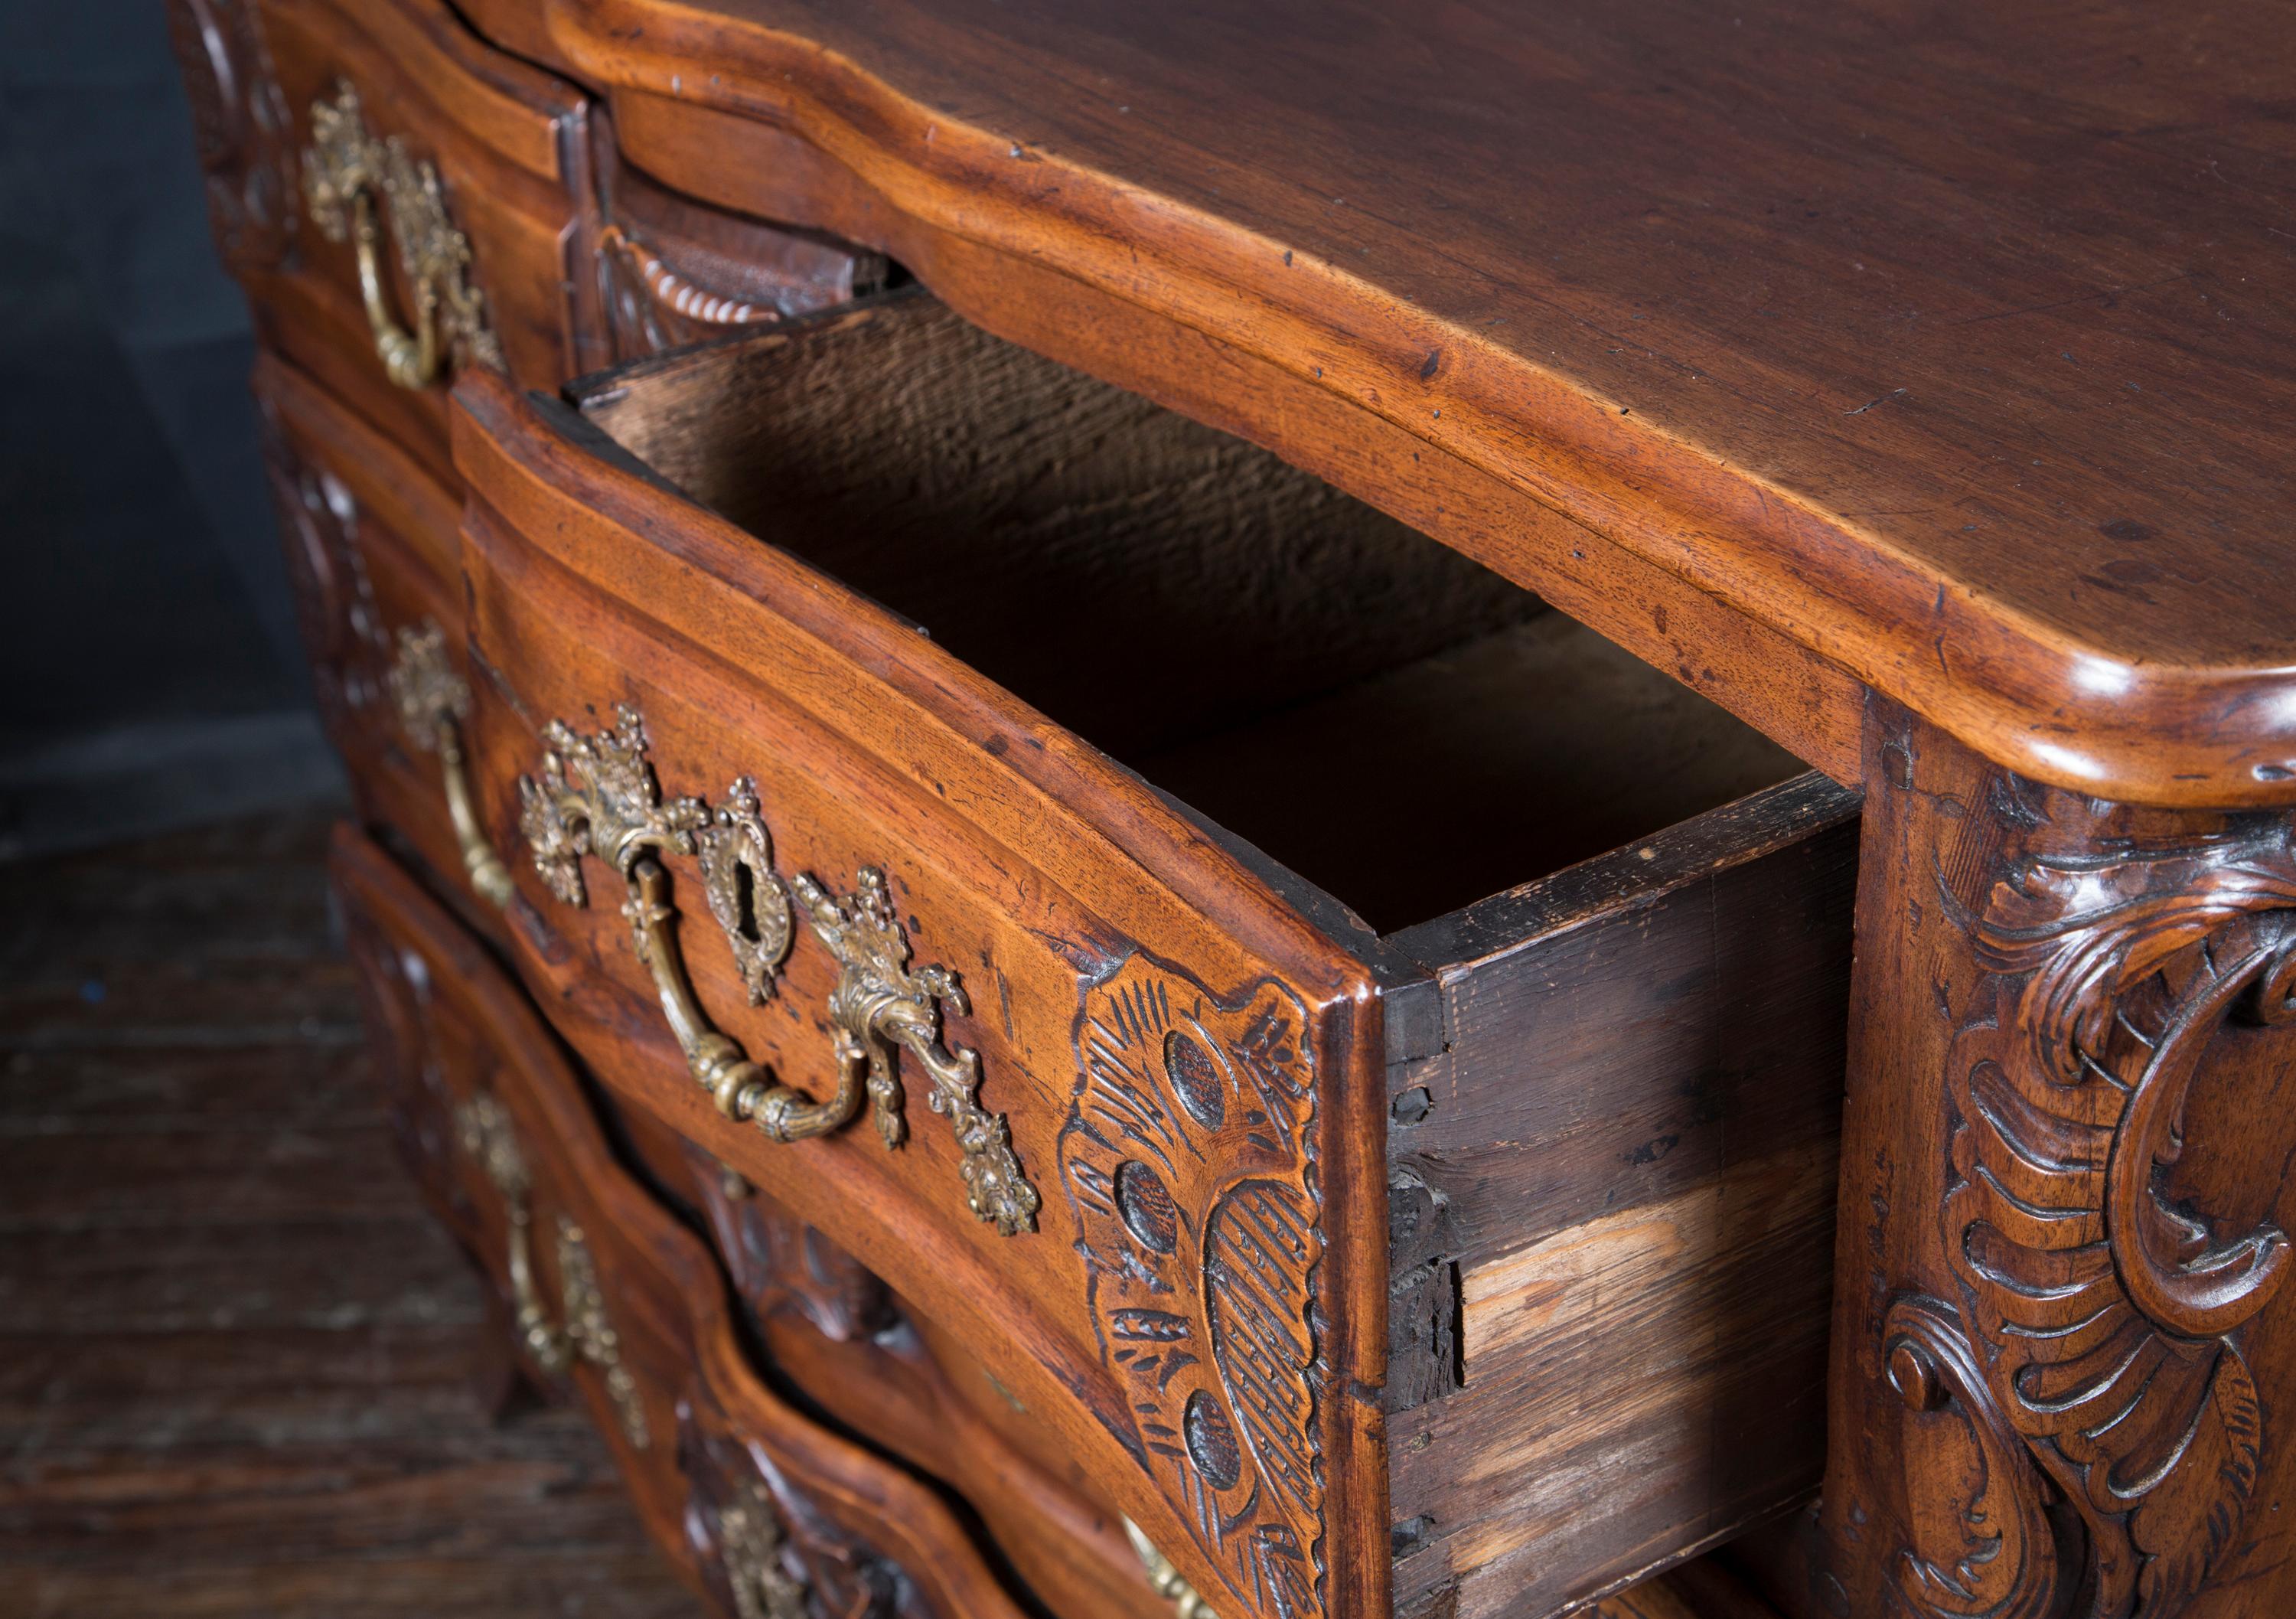 Regency Early 18th Century Regence Period Lyonnaise Walnut Commode / Chest of Drawers For Sale